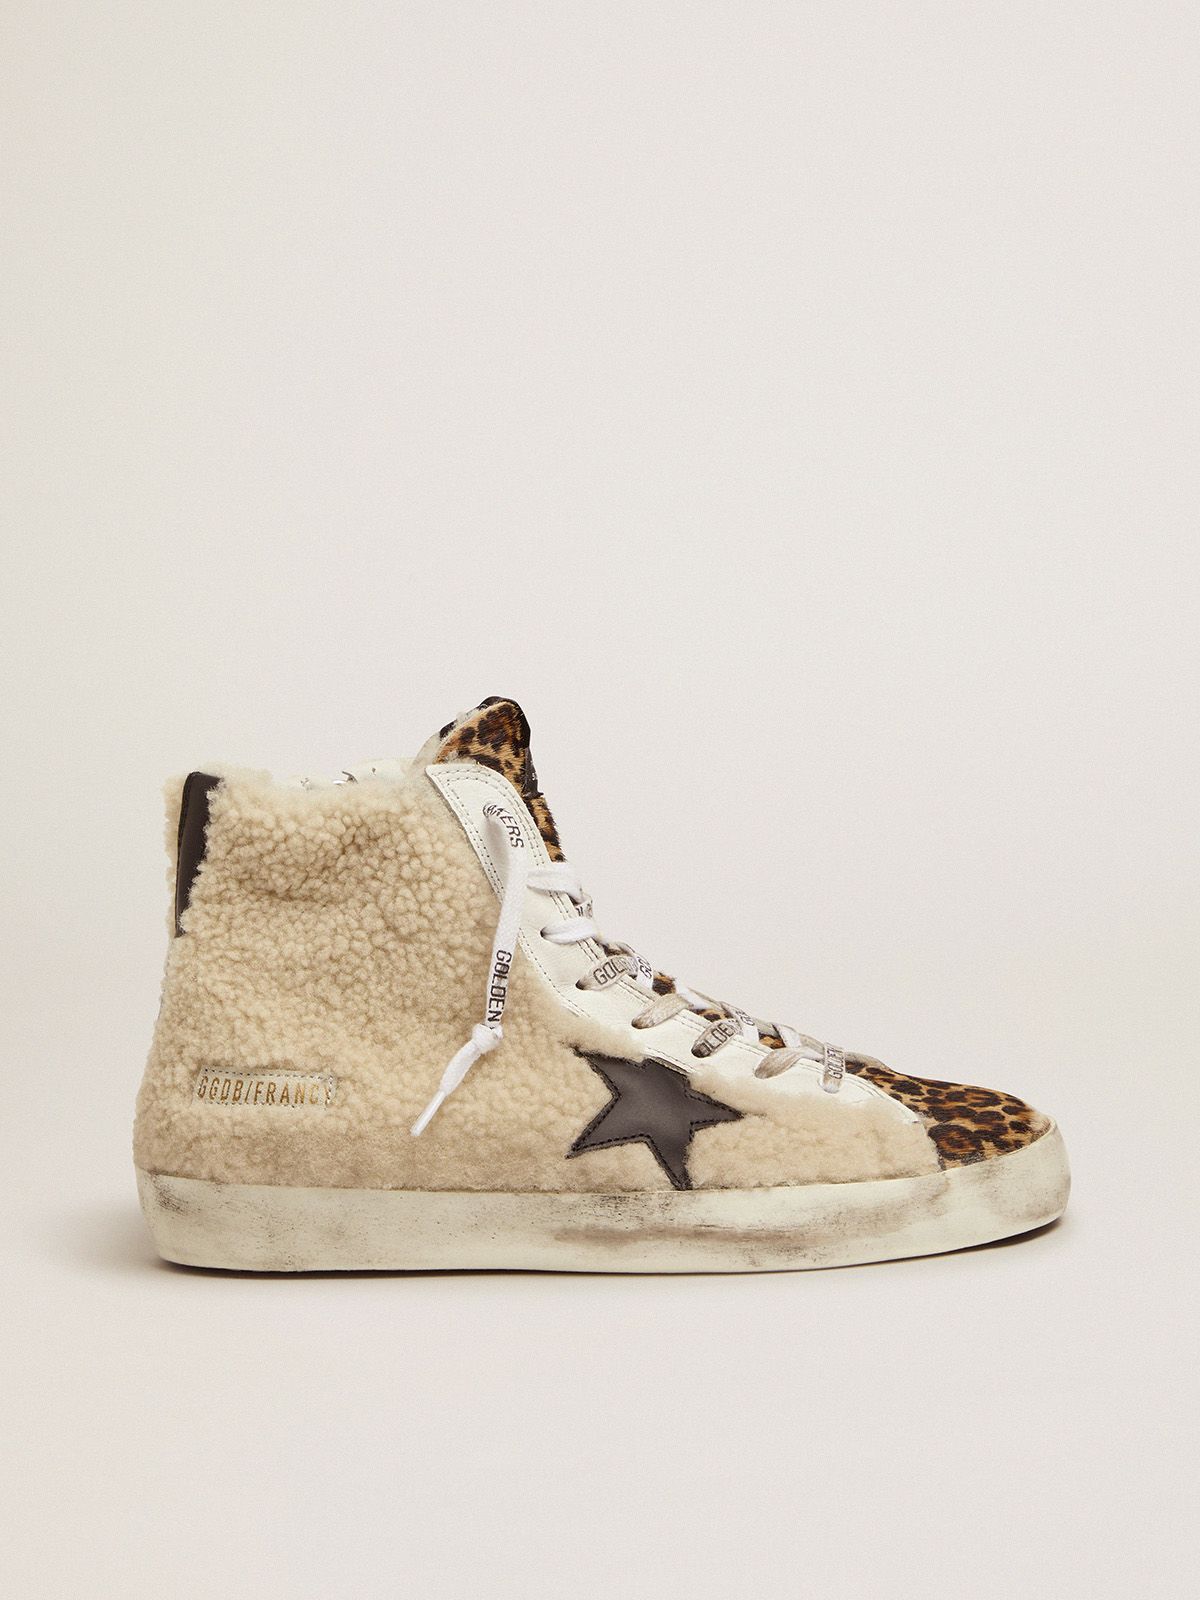 golden goose shearling a of leopard Francy print skin with made pony and sneakers